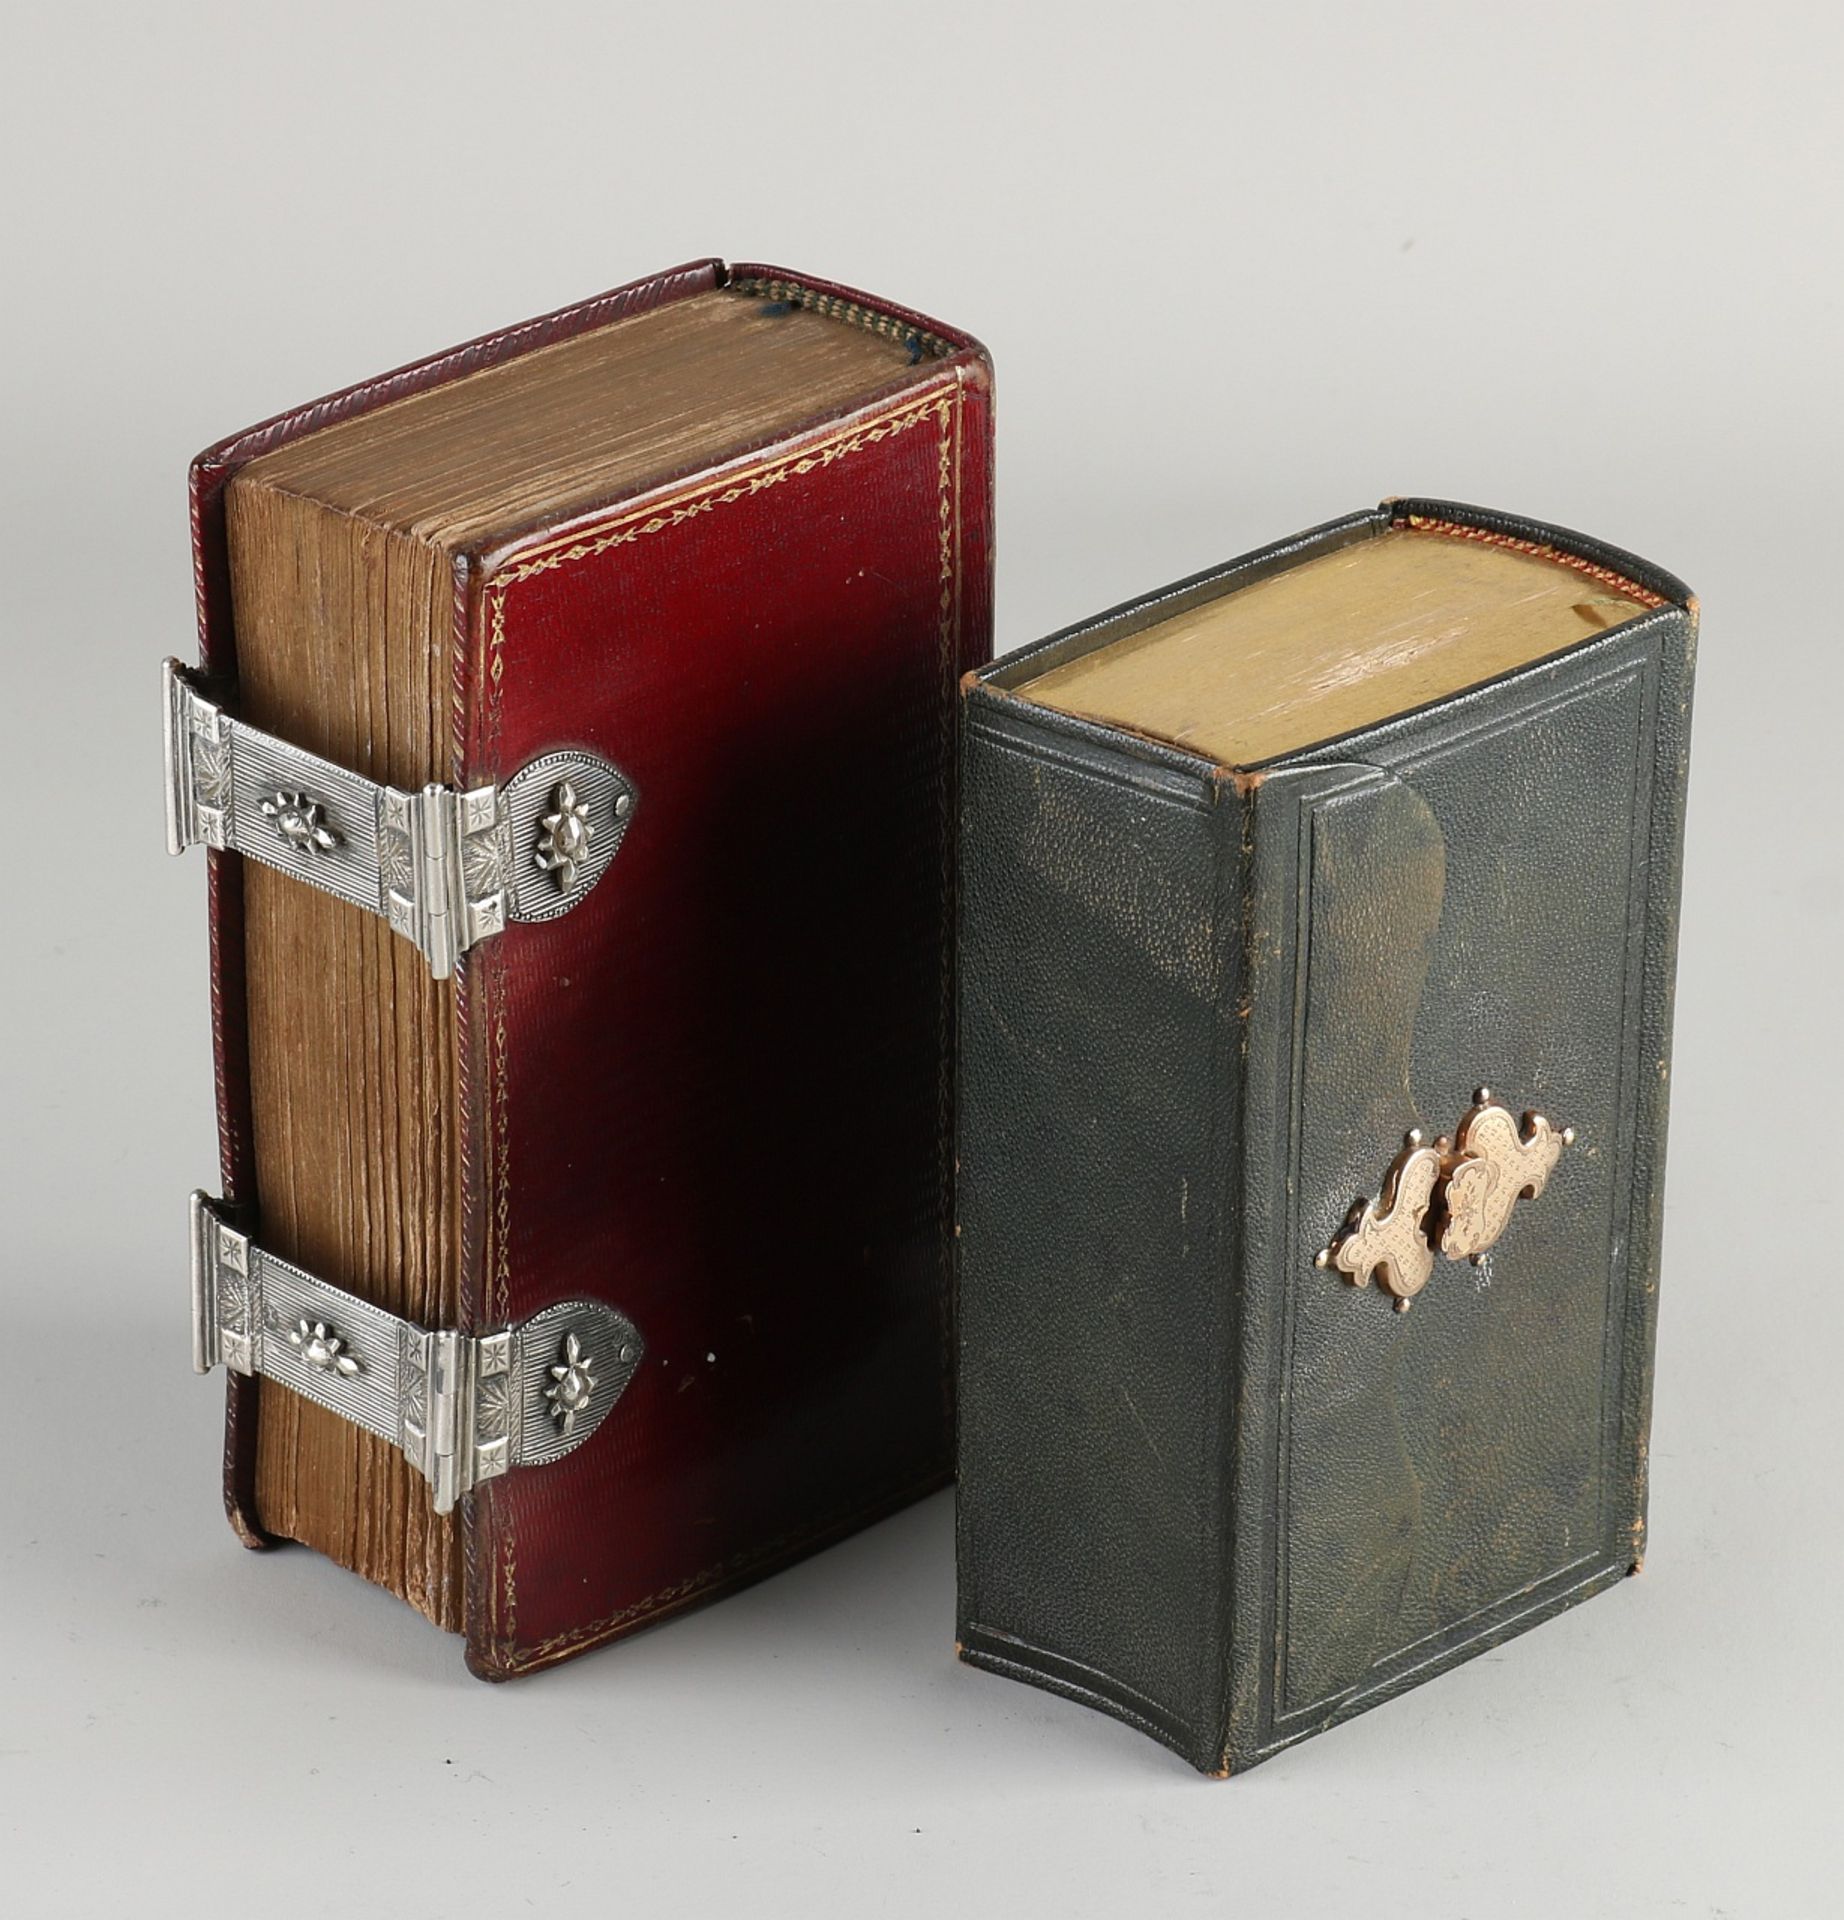 Two bibles with silver and gold lock